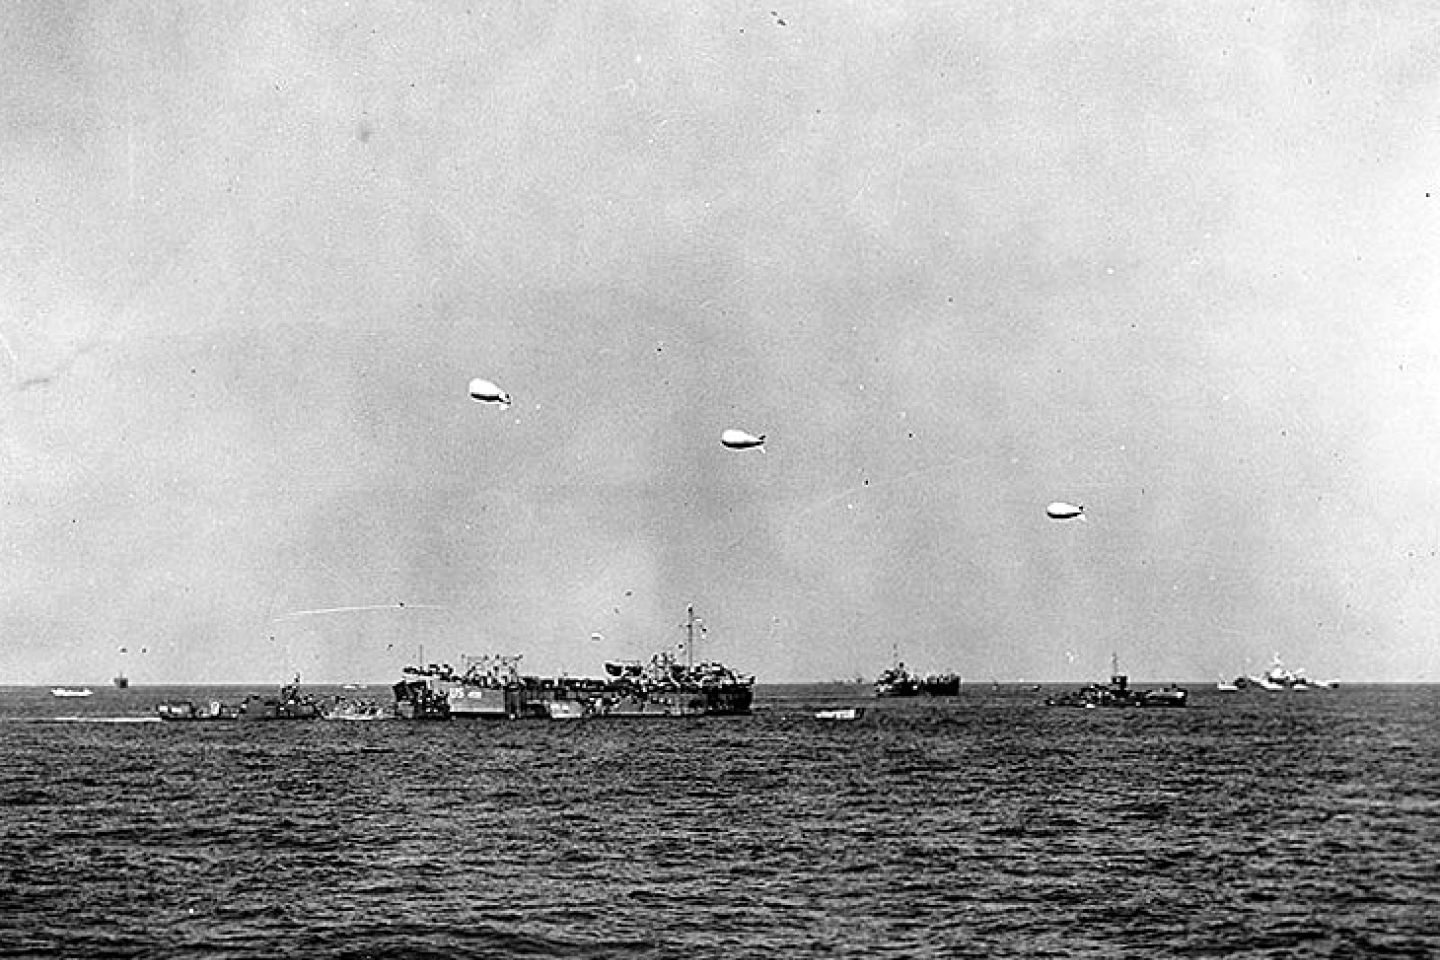 USS LST-499 and other landing ships and craft off "Utah" Beach on 6 June 1944.